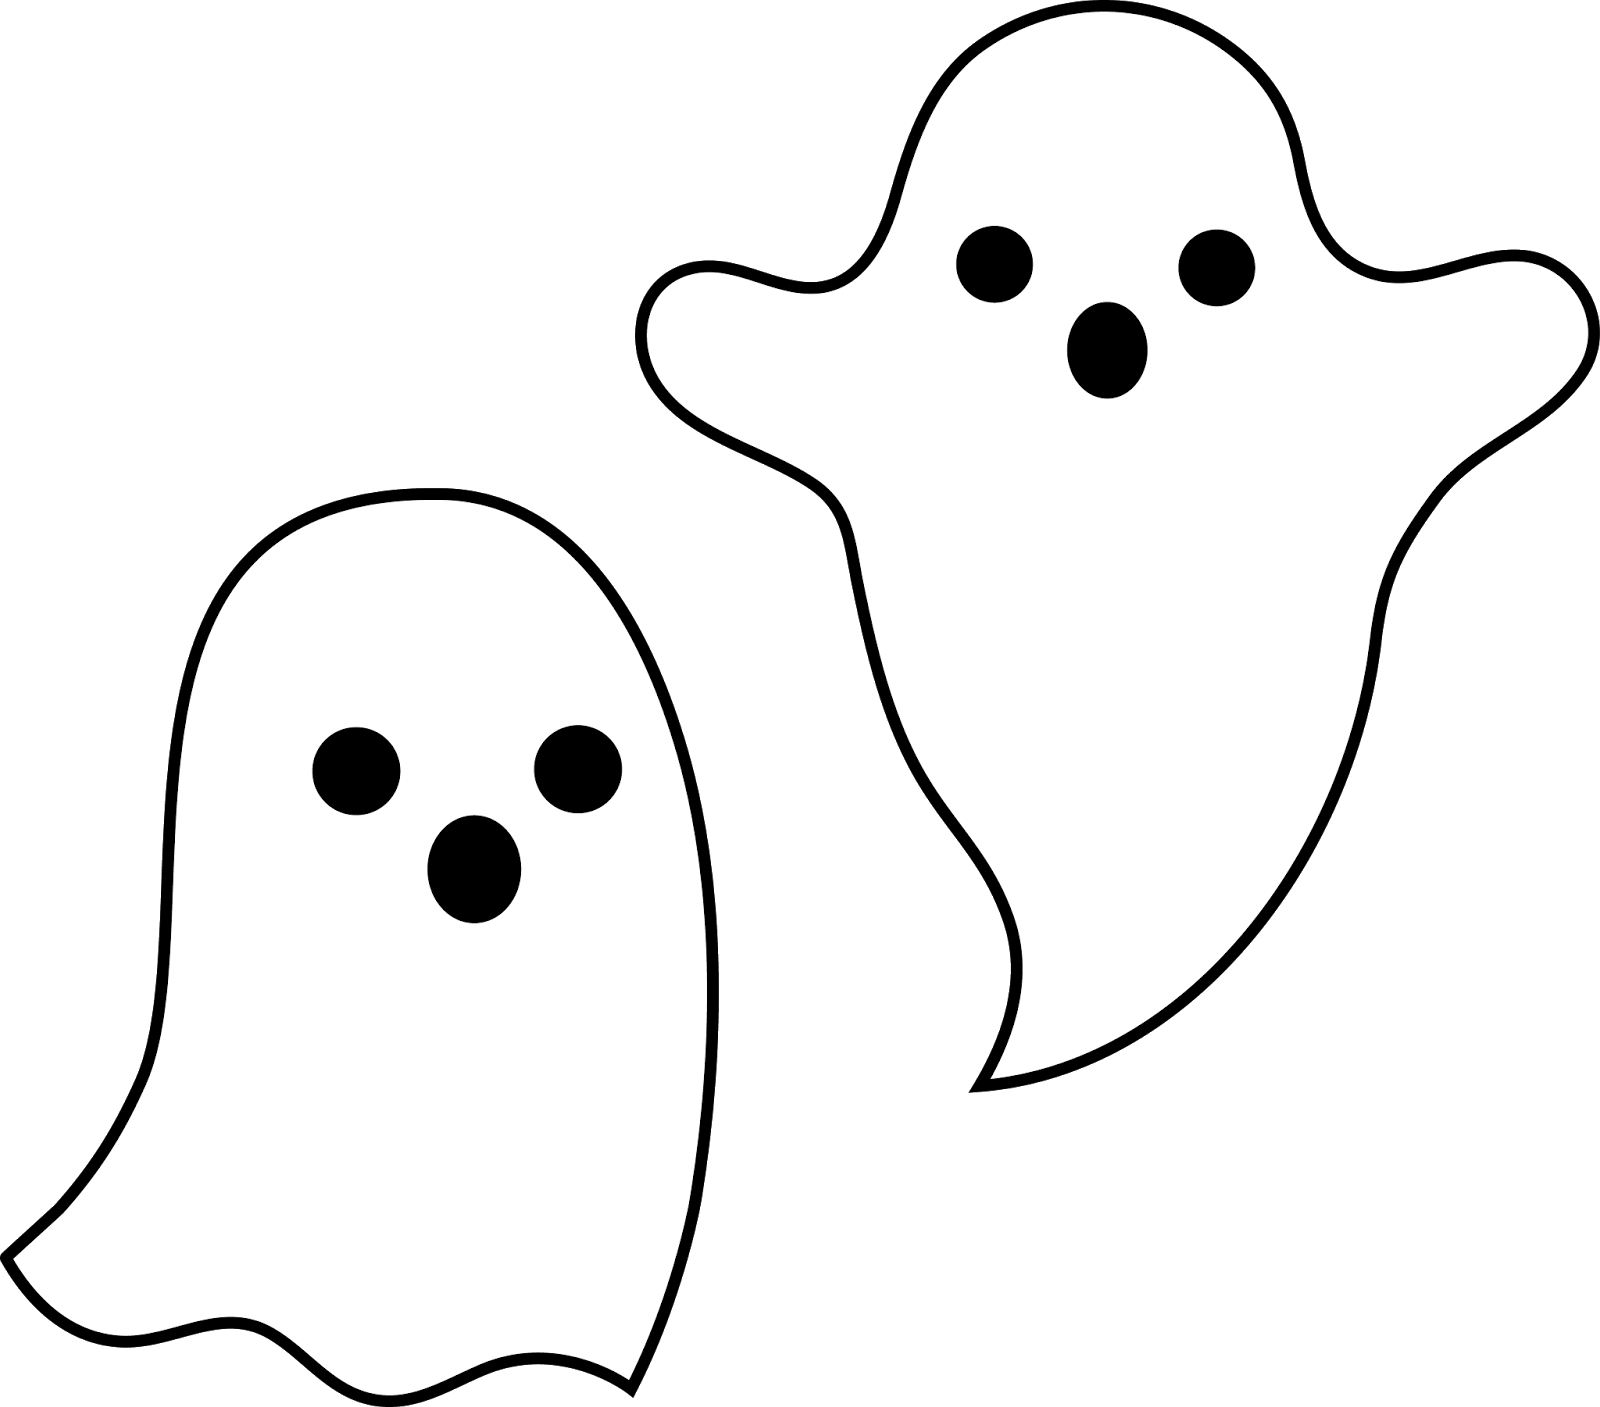 Library of free halloween picture royalty free ghosts png.